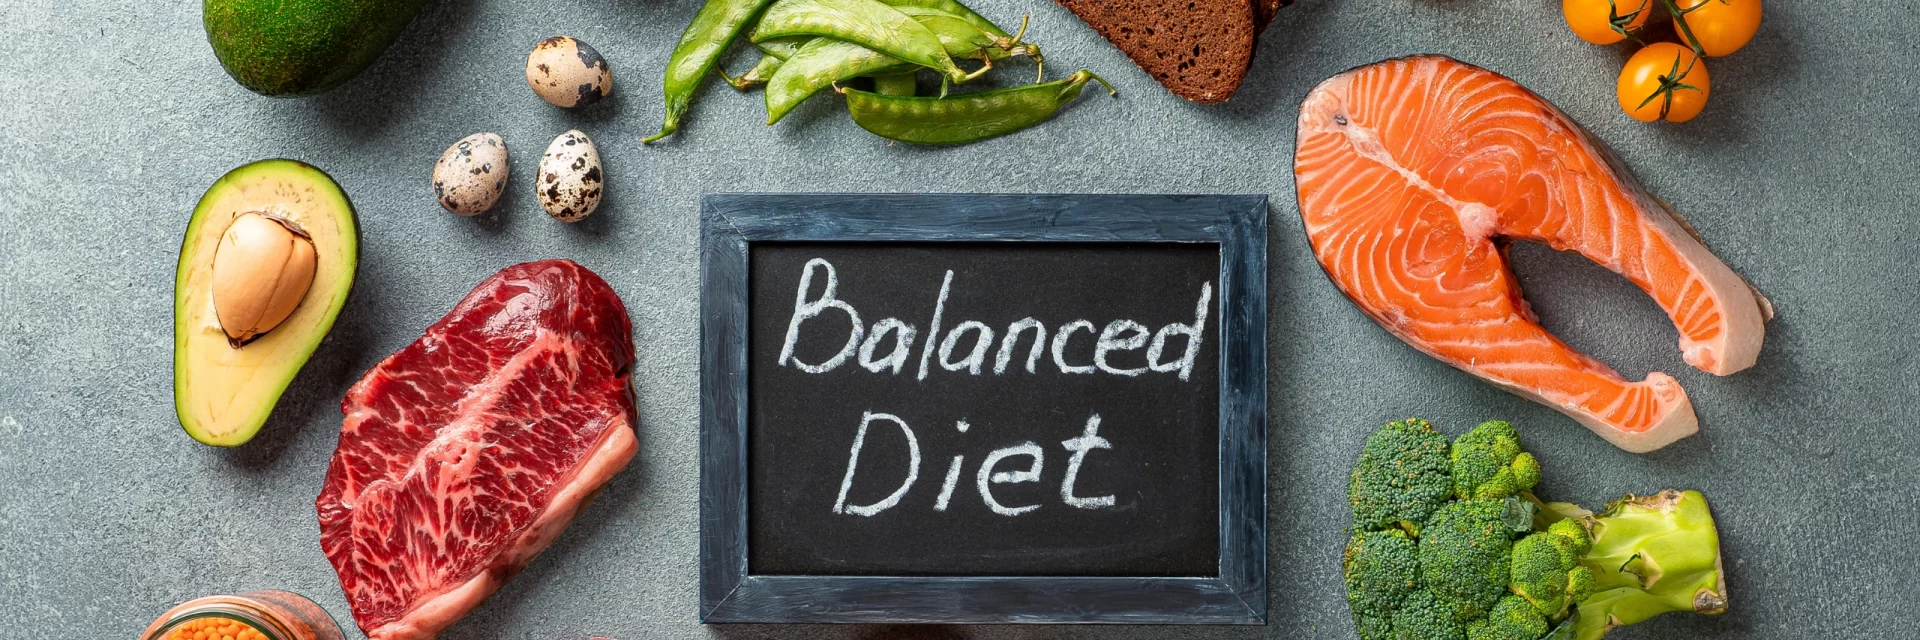 Make balanced diet your daily routine